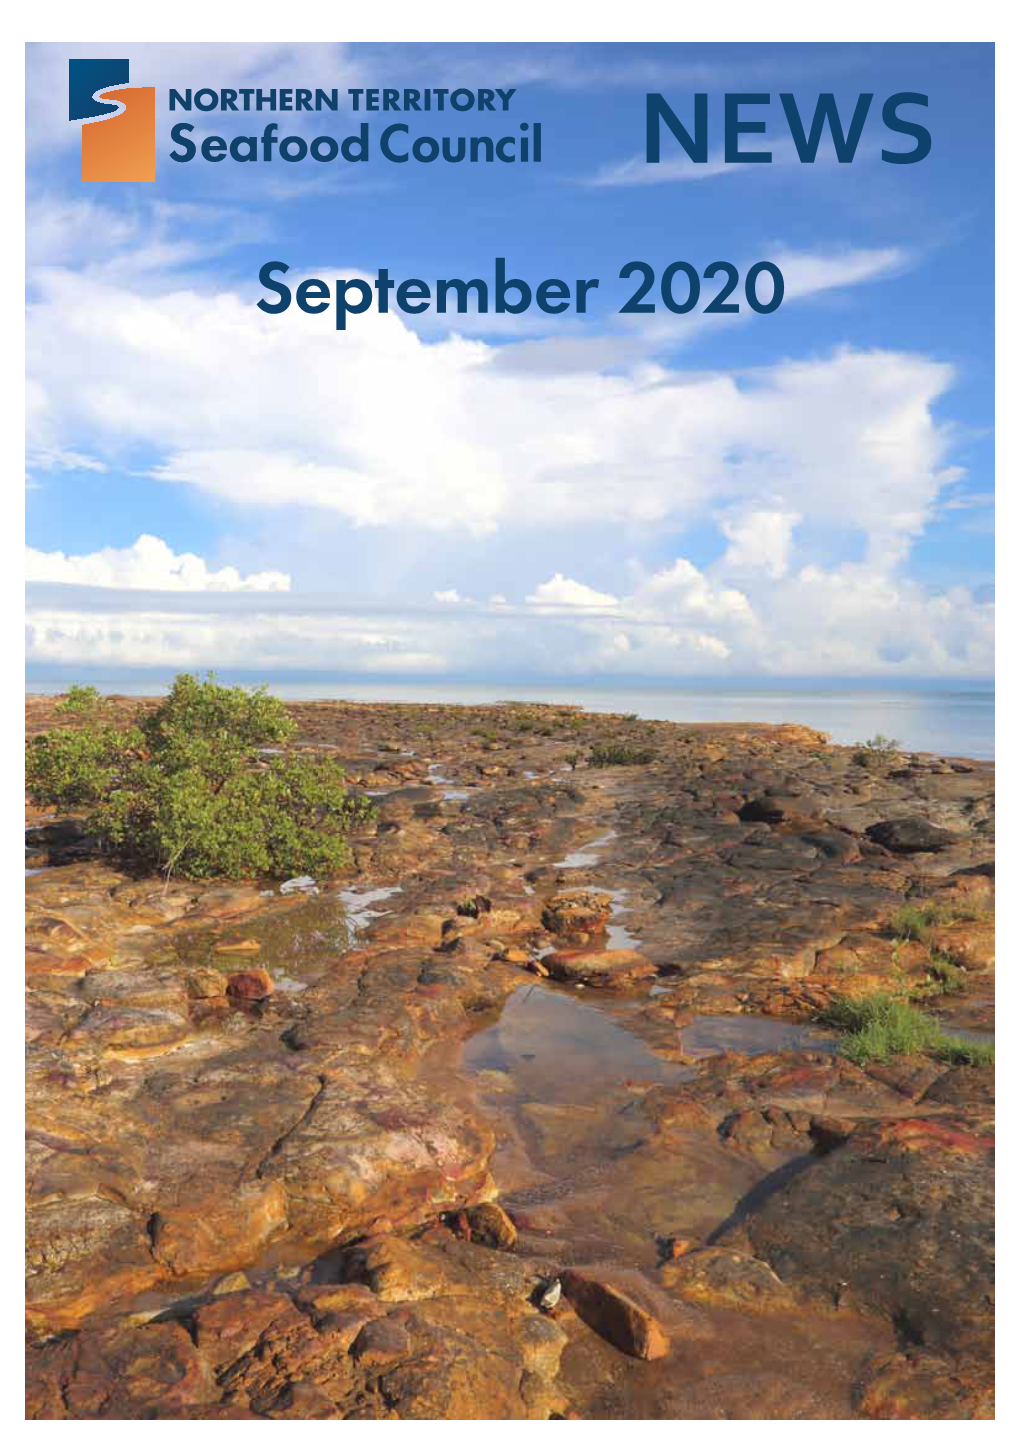 View Pdf of NT Seafood Council News September Issue